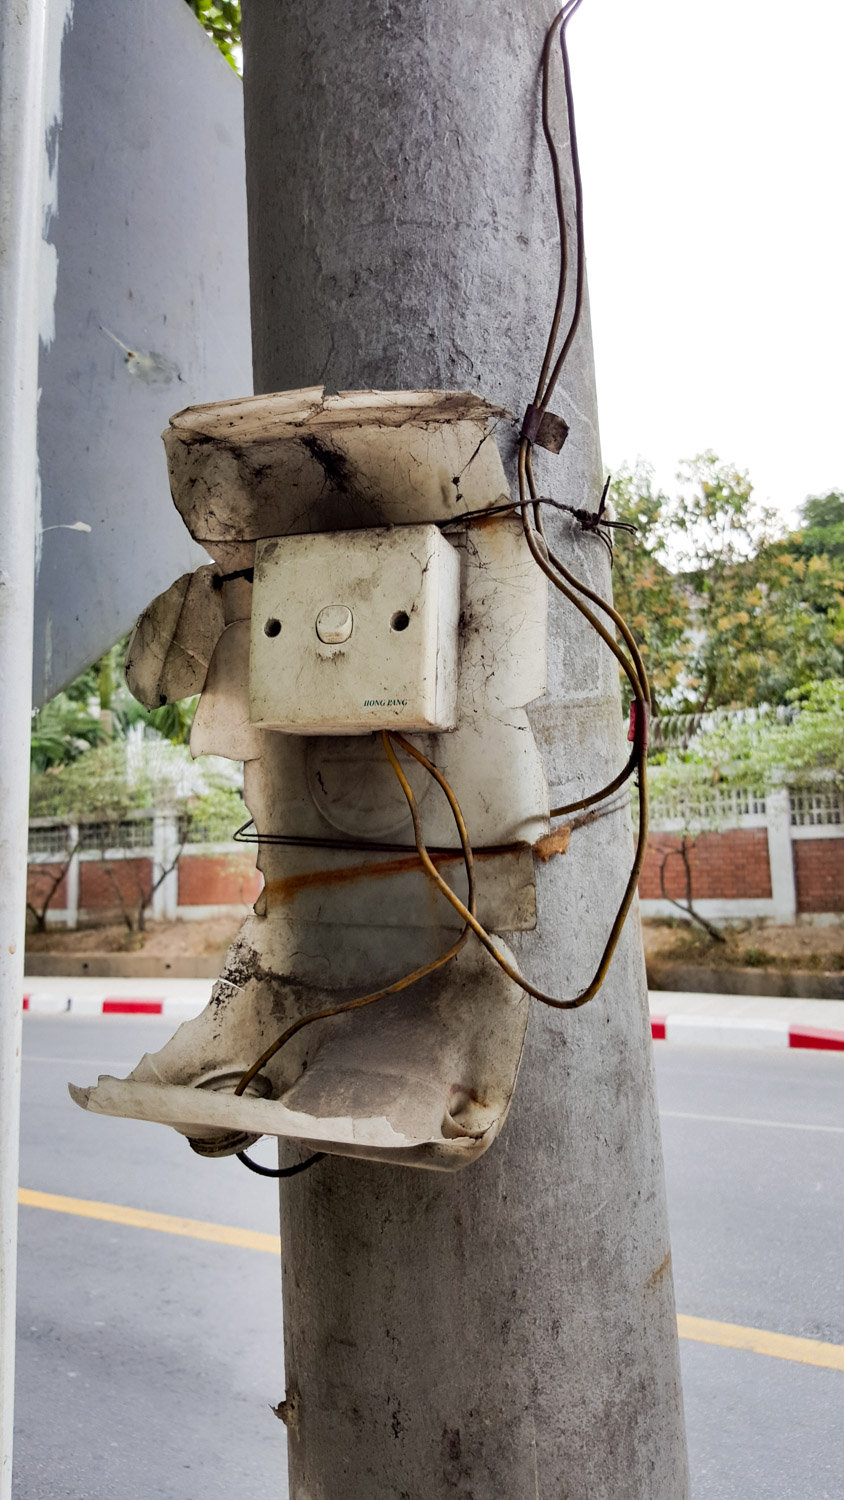 This is a light-switch on a streetlight. Quite possible the switch for the streetlight.